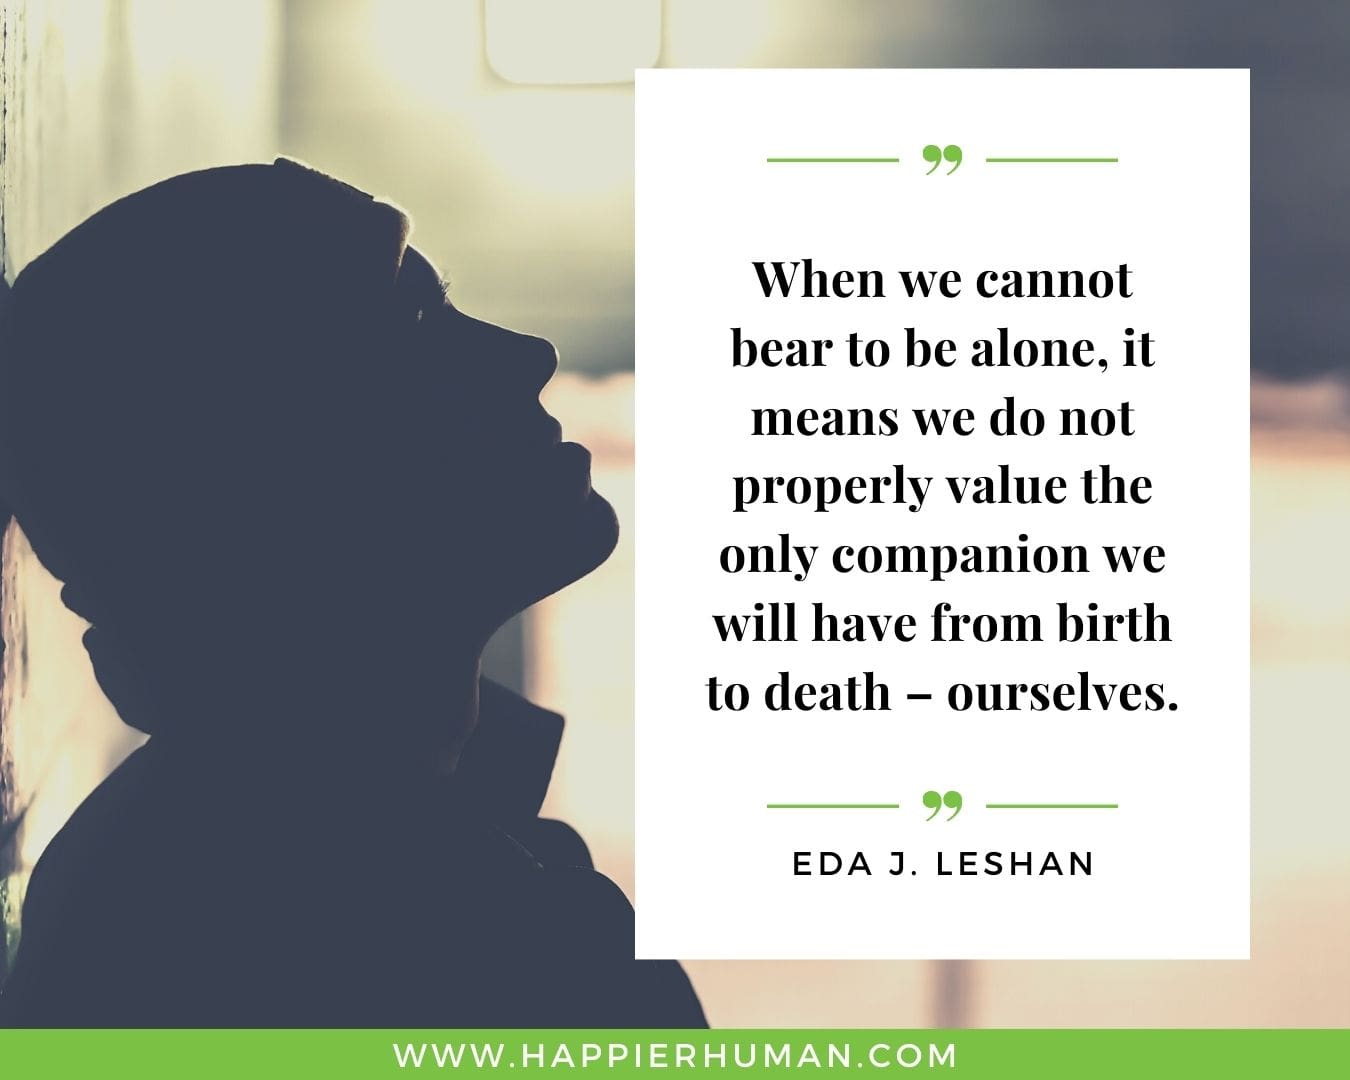 Loneliness Quotes - “When we cannot bear to be alone, it means we do not properly value the only companion we will have from birth to death – ourselves.”– Eda J. LeShan